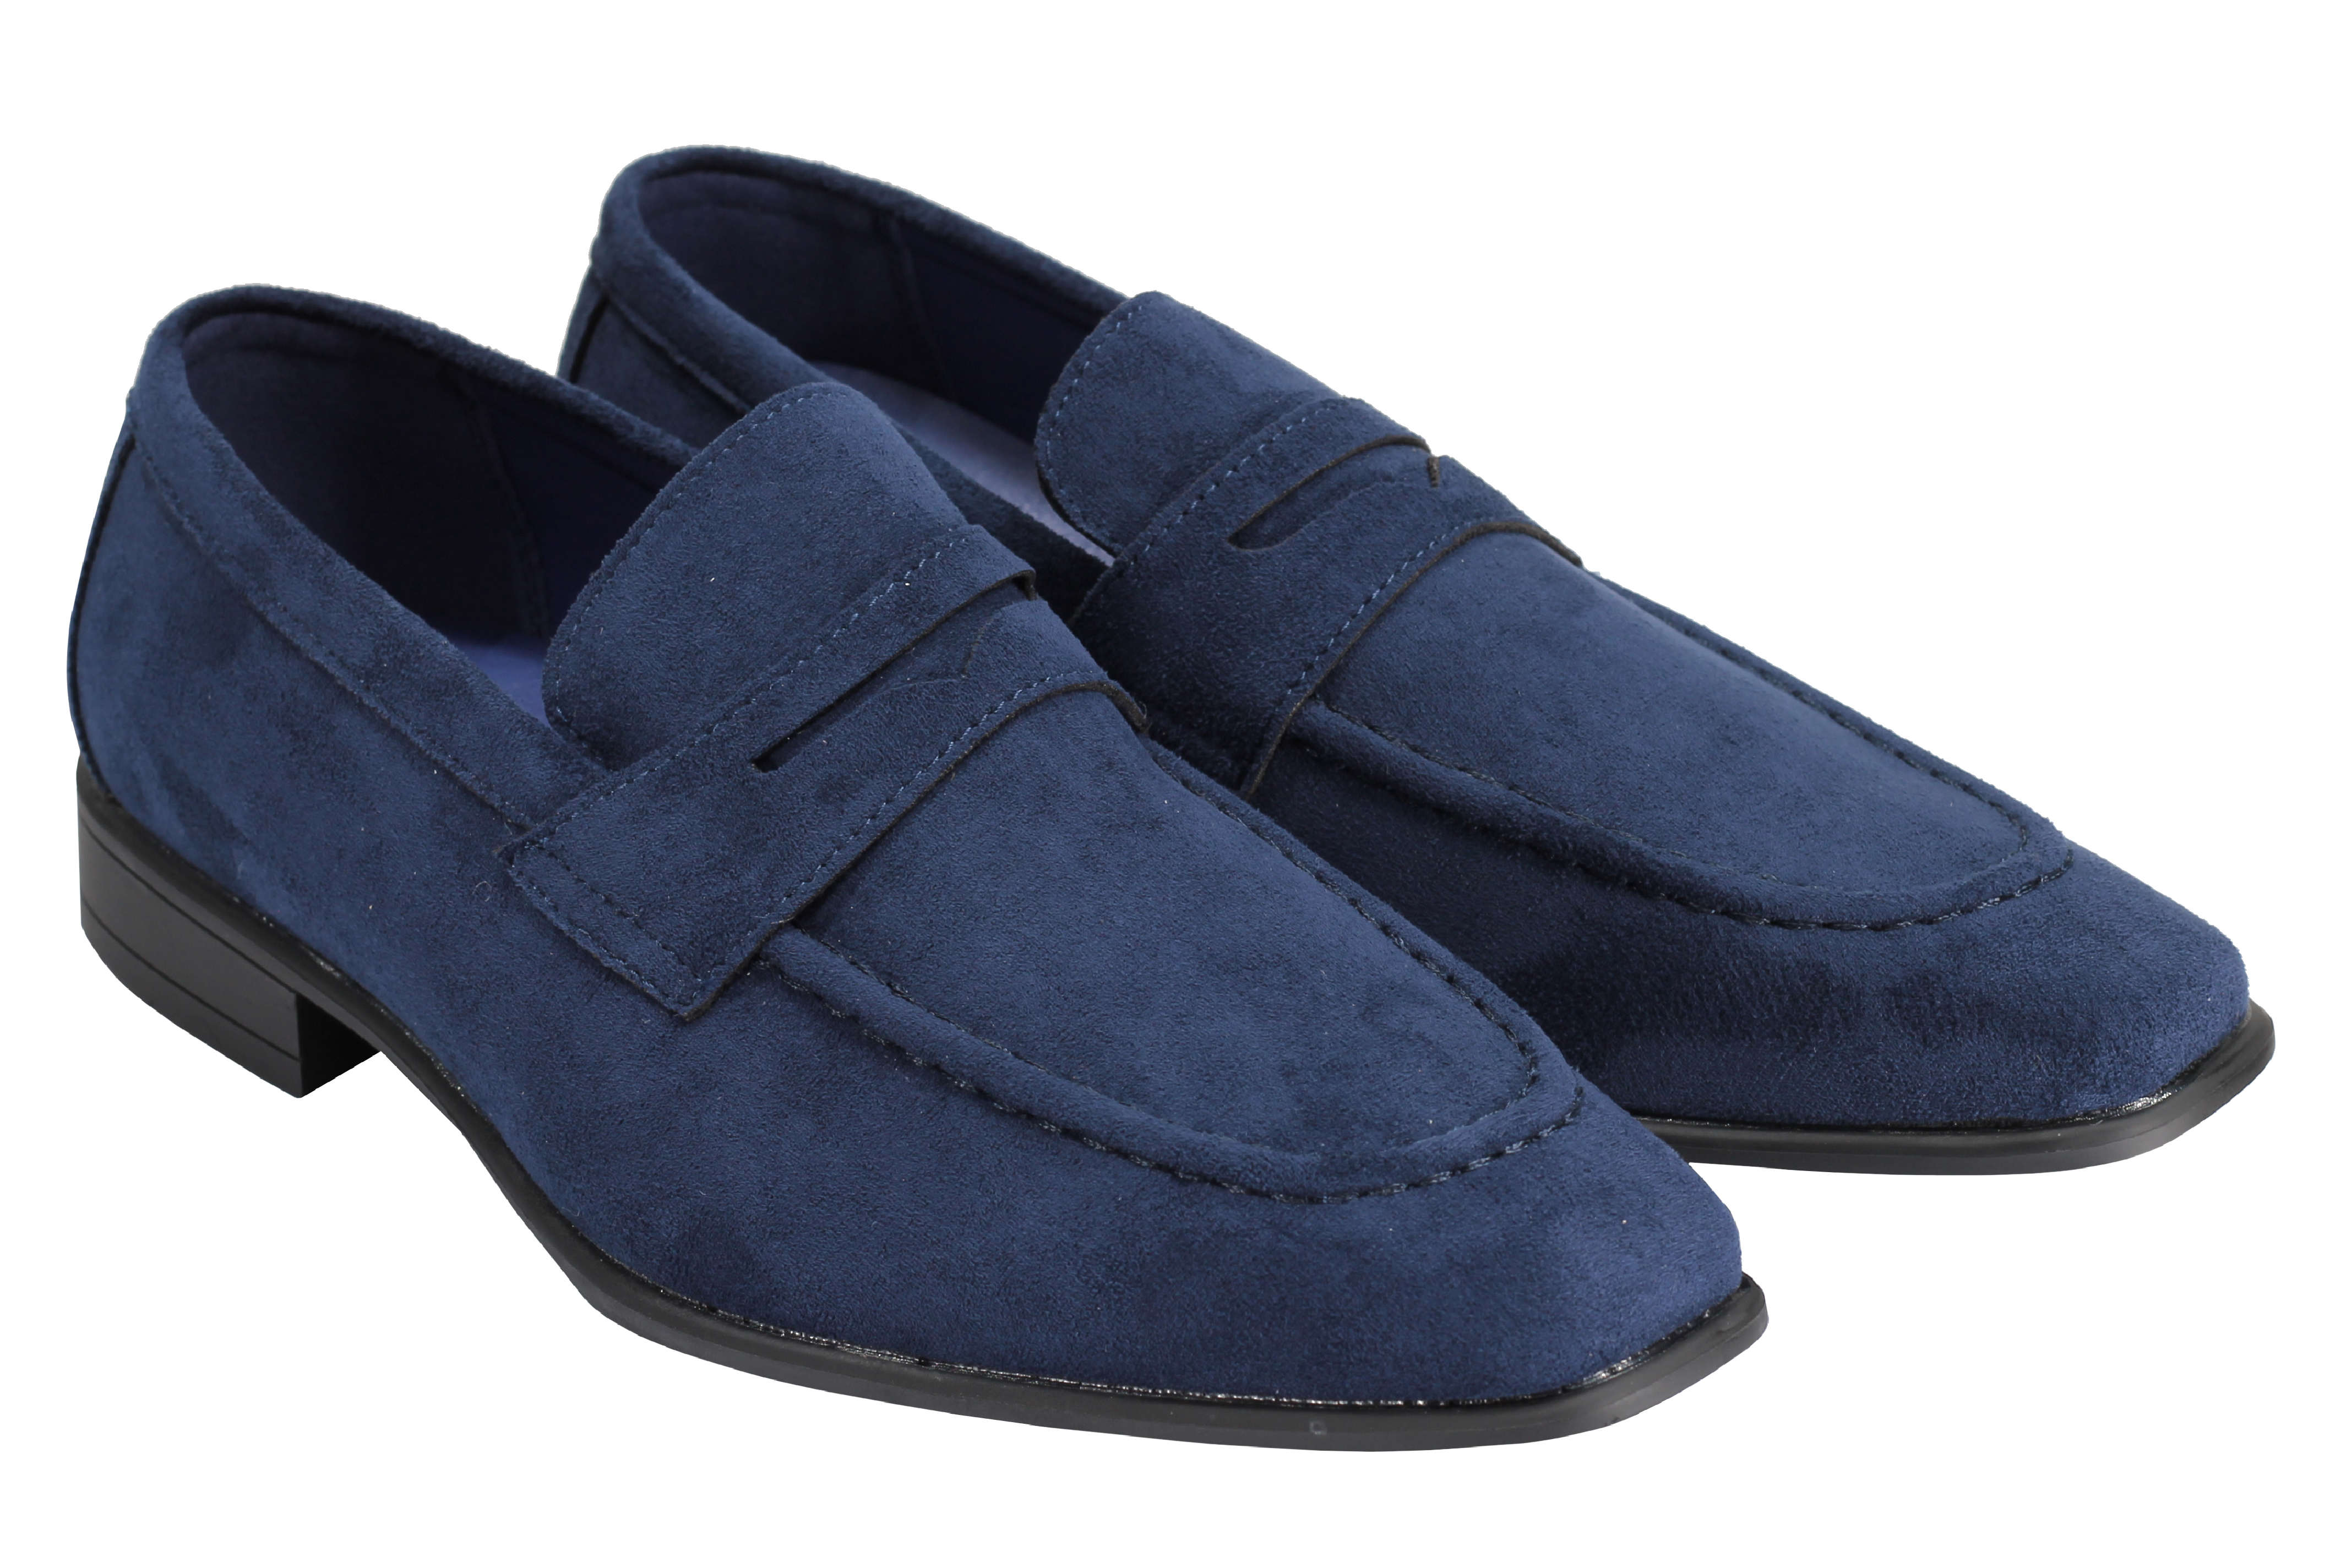 SUEDE PENNY LOAFERS